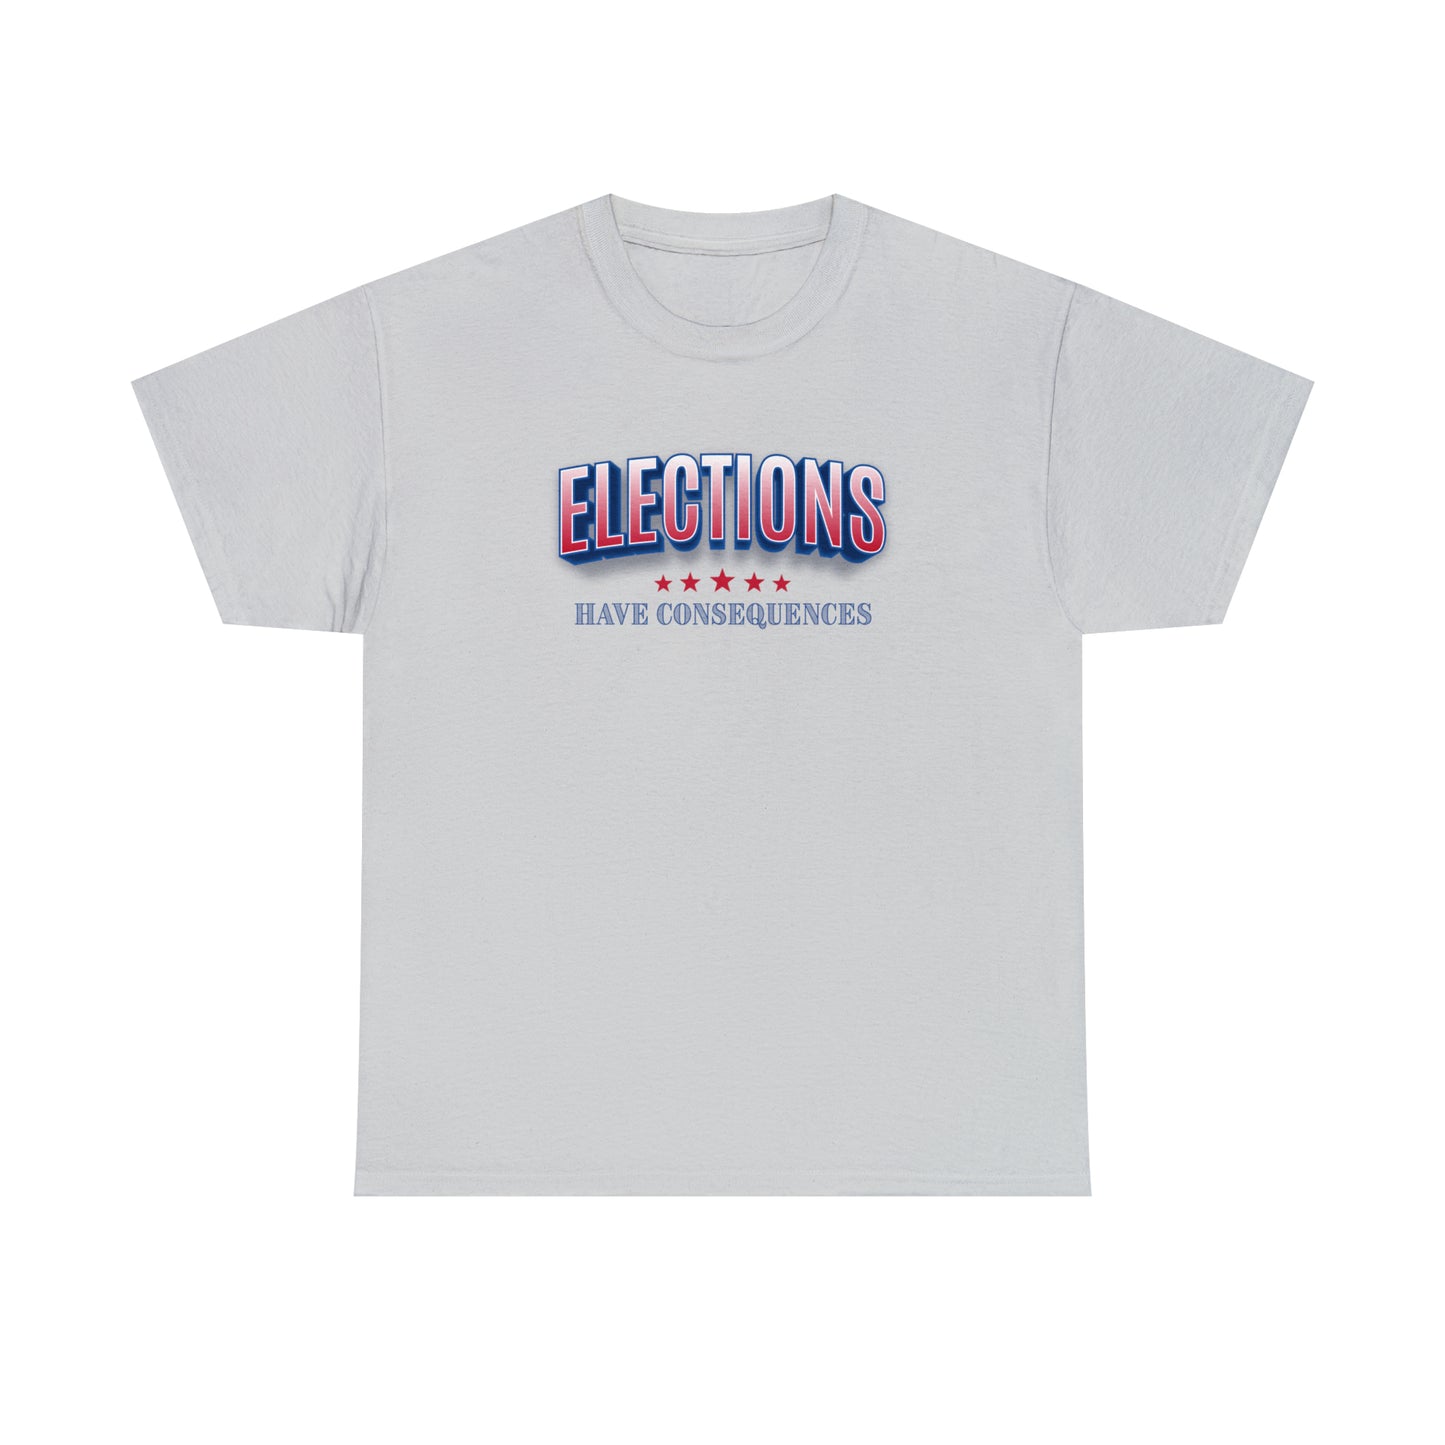 Elections T-Shirt For Election Squad Voter TShirt For Election Day T Shirt Political Shirt For Election Campaign Tee For Voter Registration